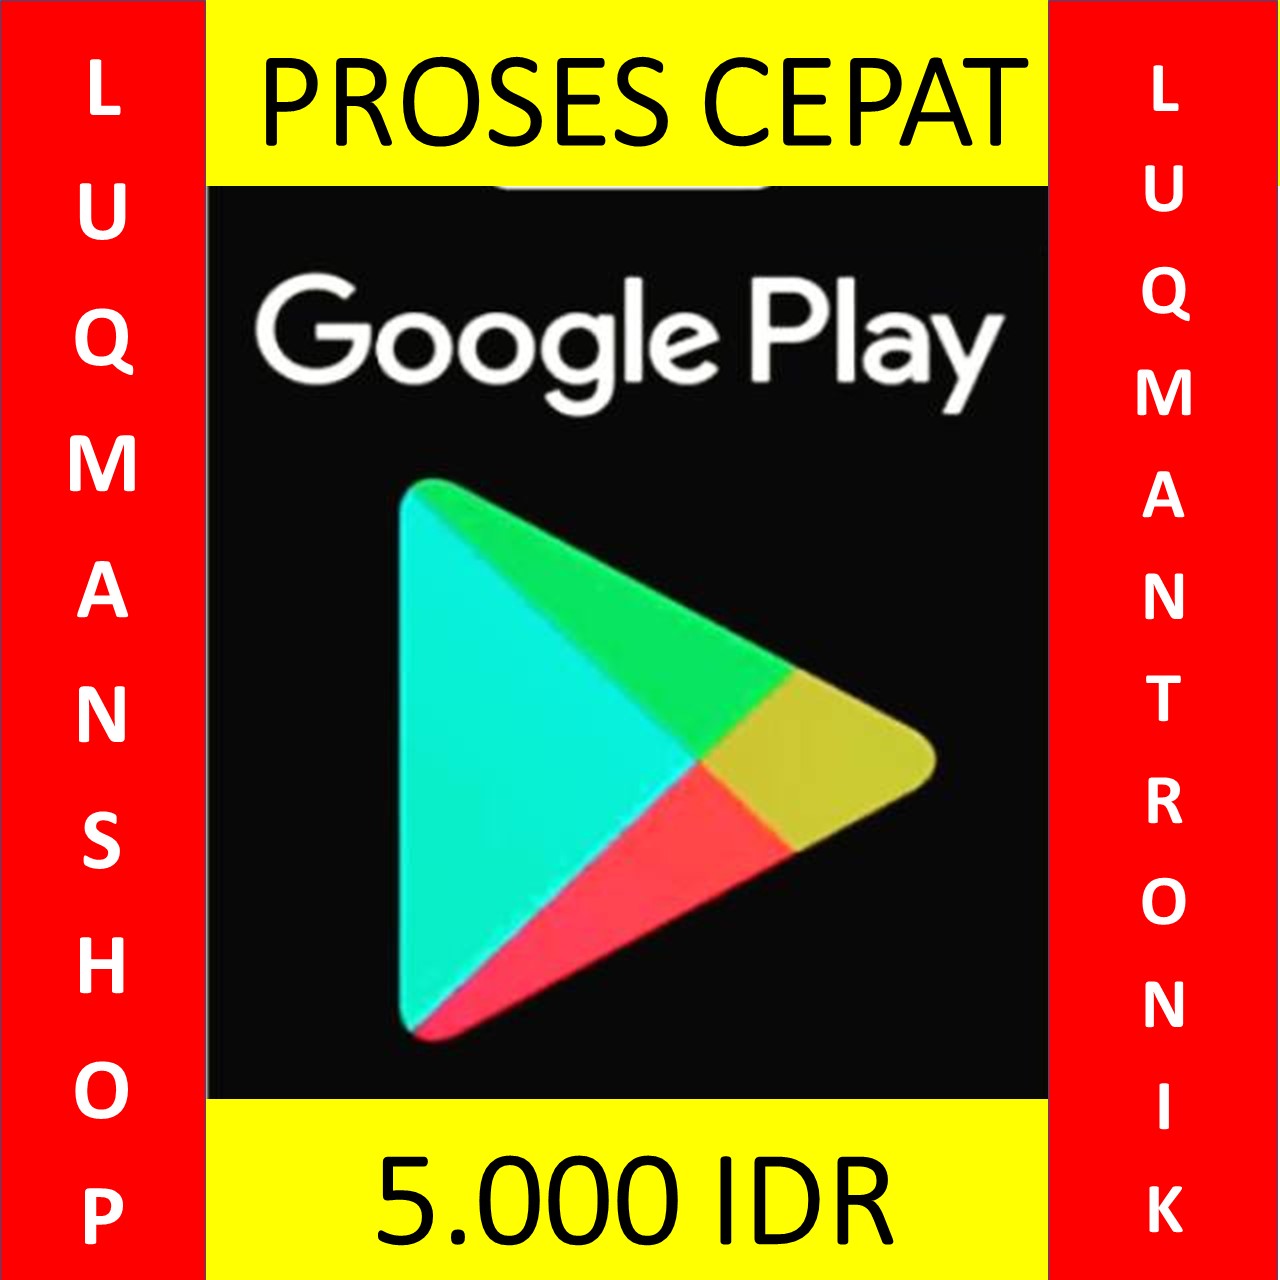 Voucher Game GOOGLE PLAY INDONESIA - Google Play Gift Card Indonesia Rp. 5.000